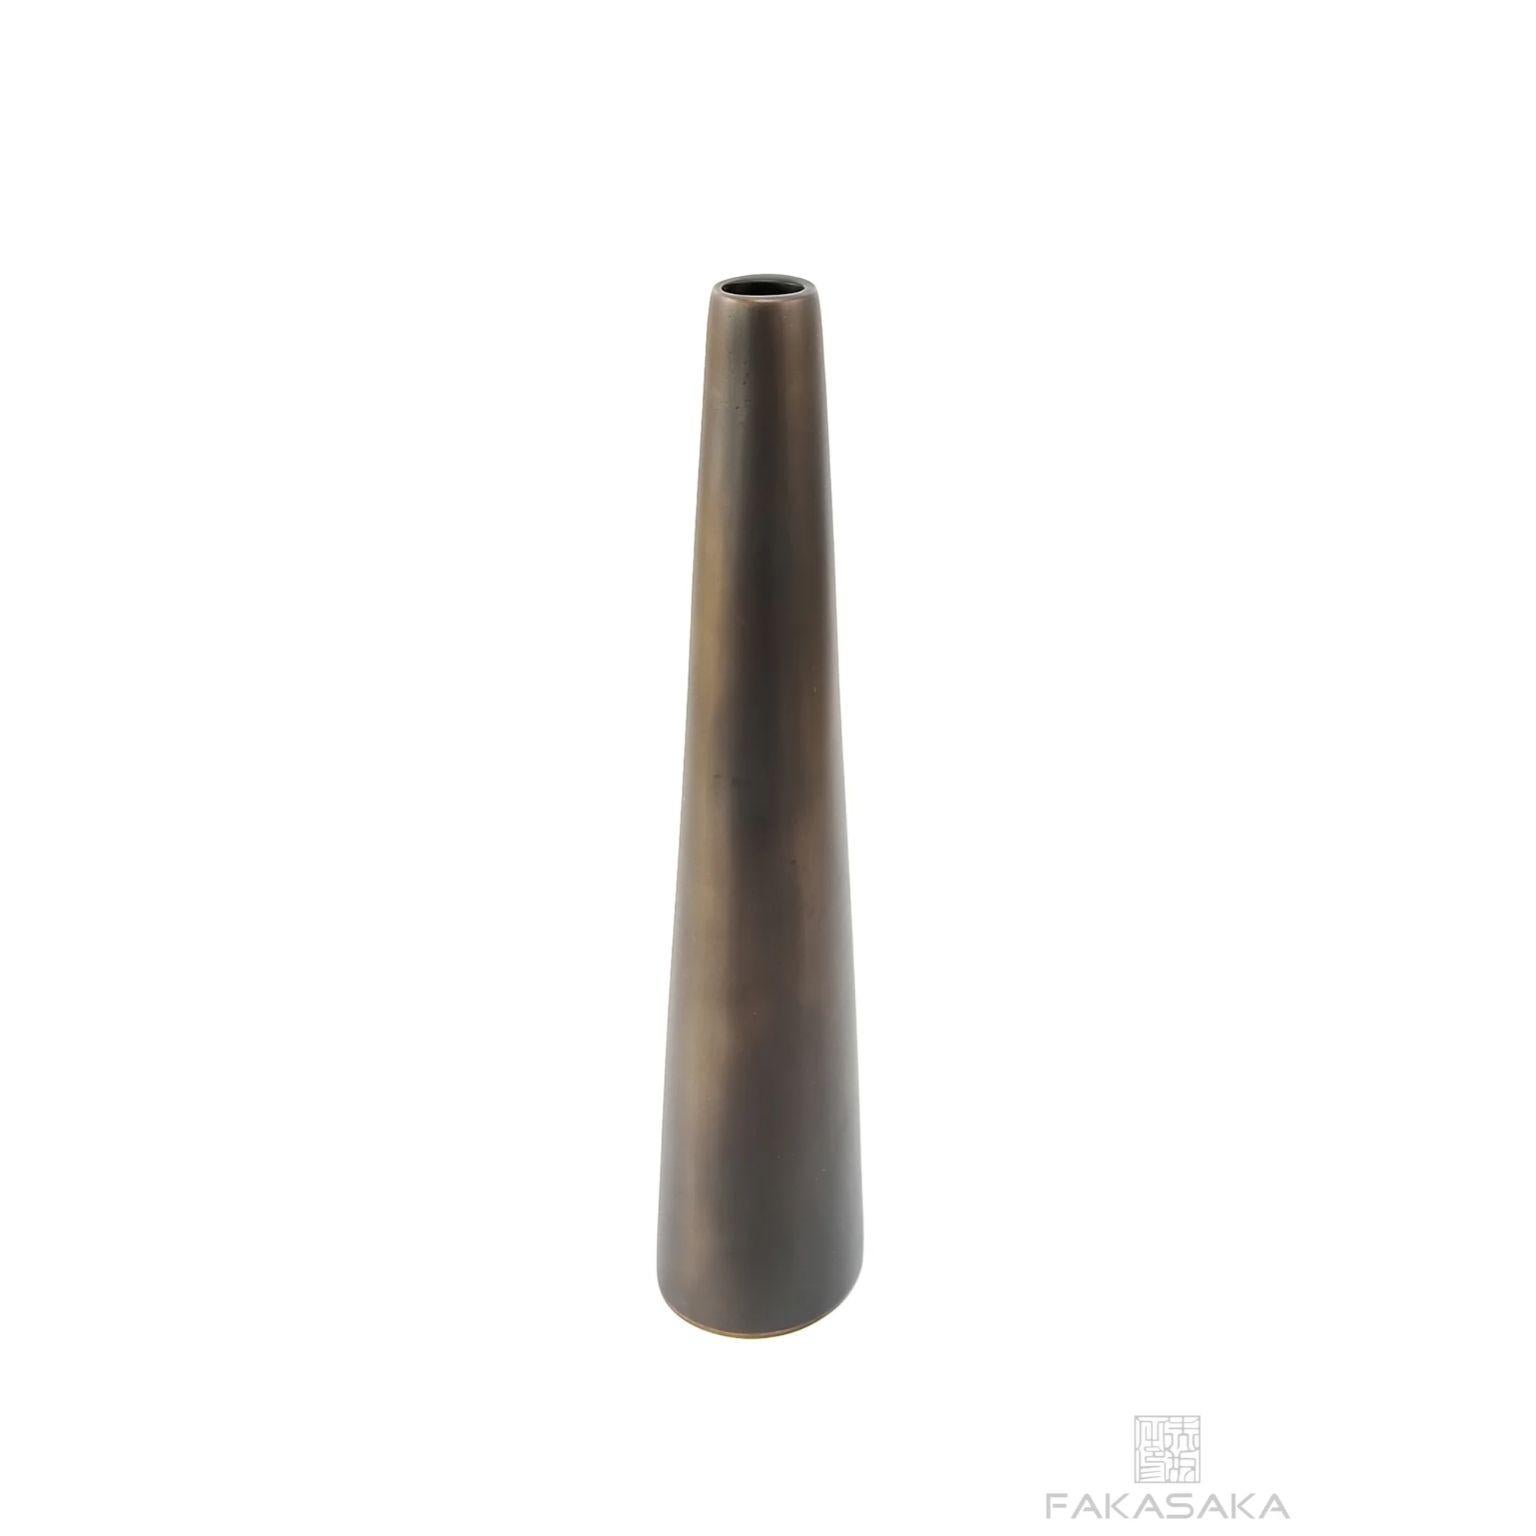 Heather candleholder by Fakasaka Design.
Dimensions: W 9.5 cm D 5.5 cm H 29.5 cm.
Materials: dark bronze.
Also available in polished bronze.

 Fakasaka is a design company focused on production of high-end furniture, lighting, decorative